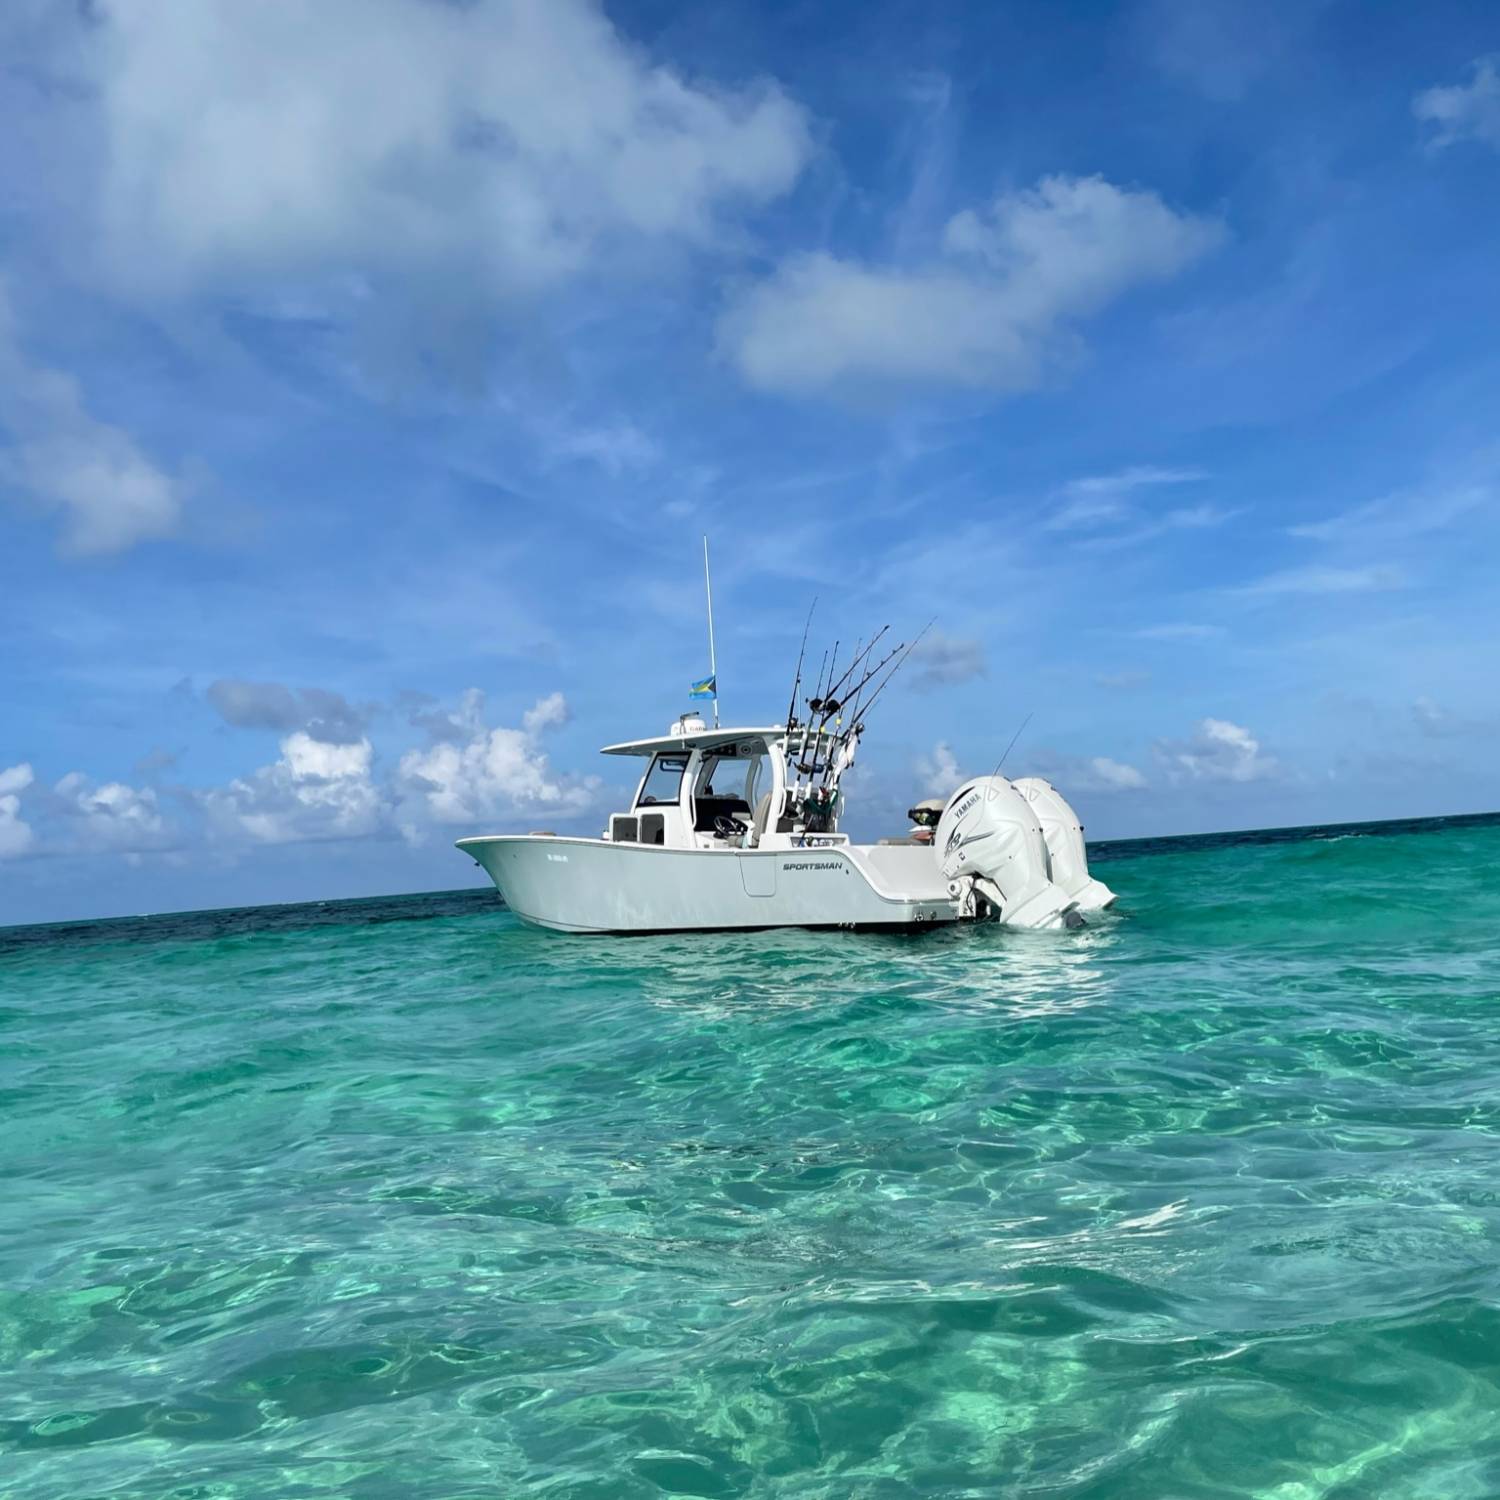 Title: Island Time - On board their Sportsman Open 322 Center Console - Location: Nunjack Cay, Bahamas. Participating in the Photo Contest #SportsmanMarch2023